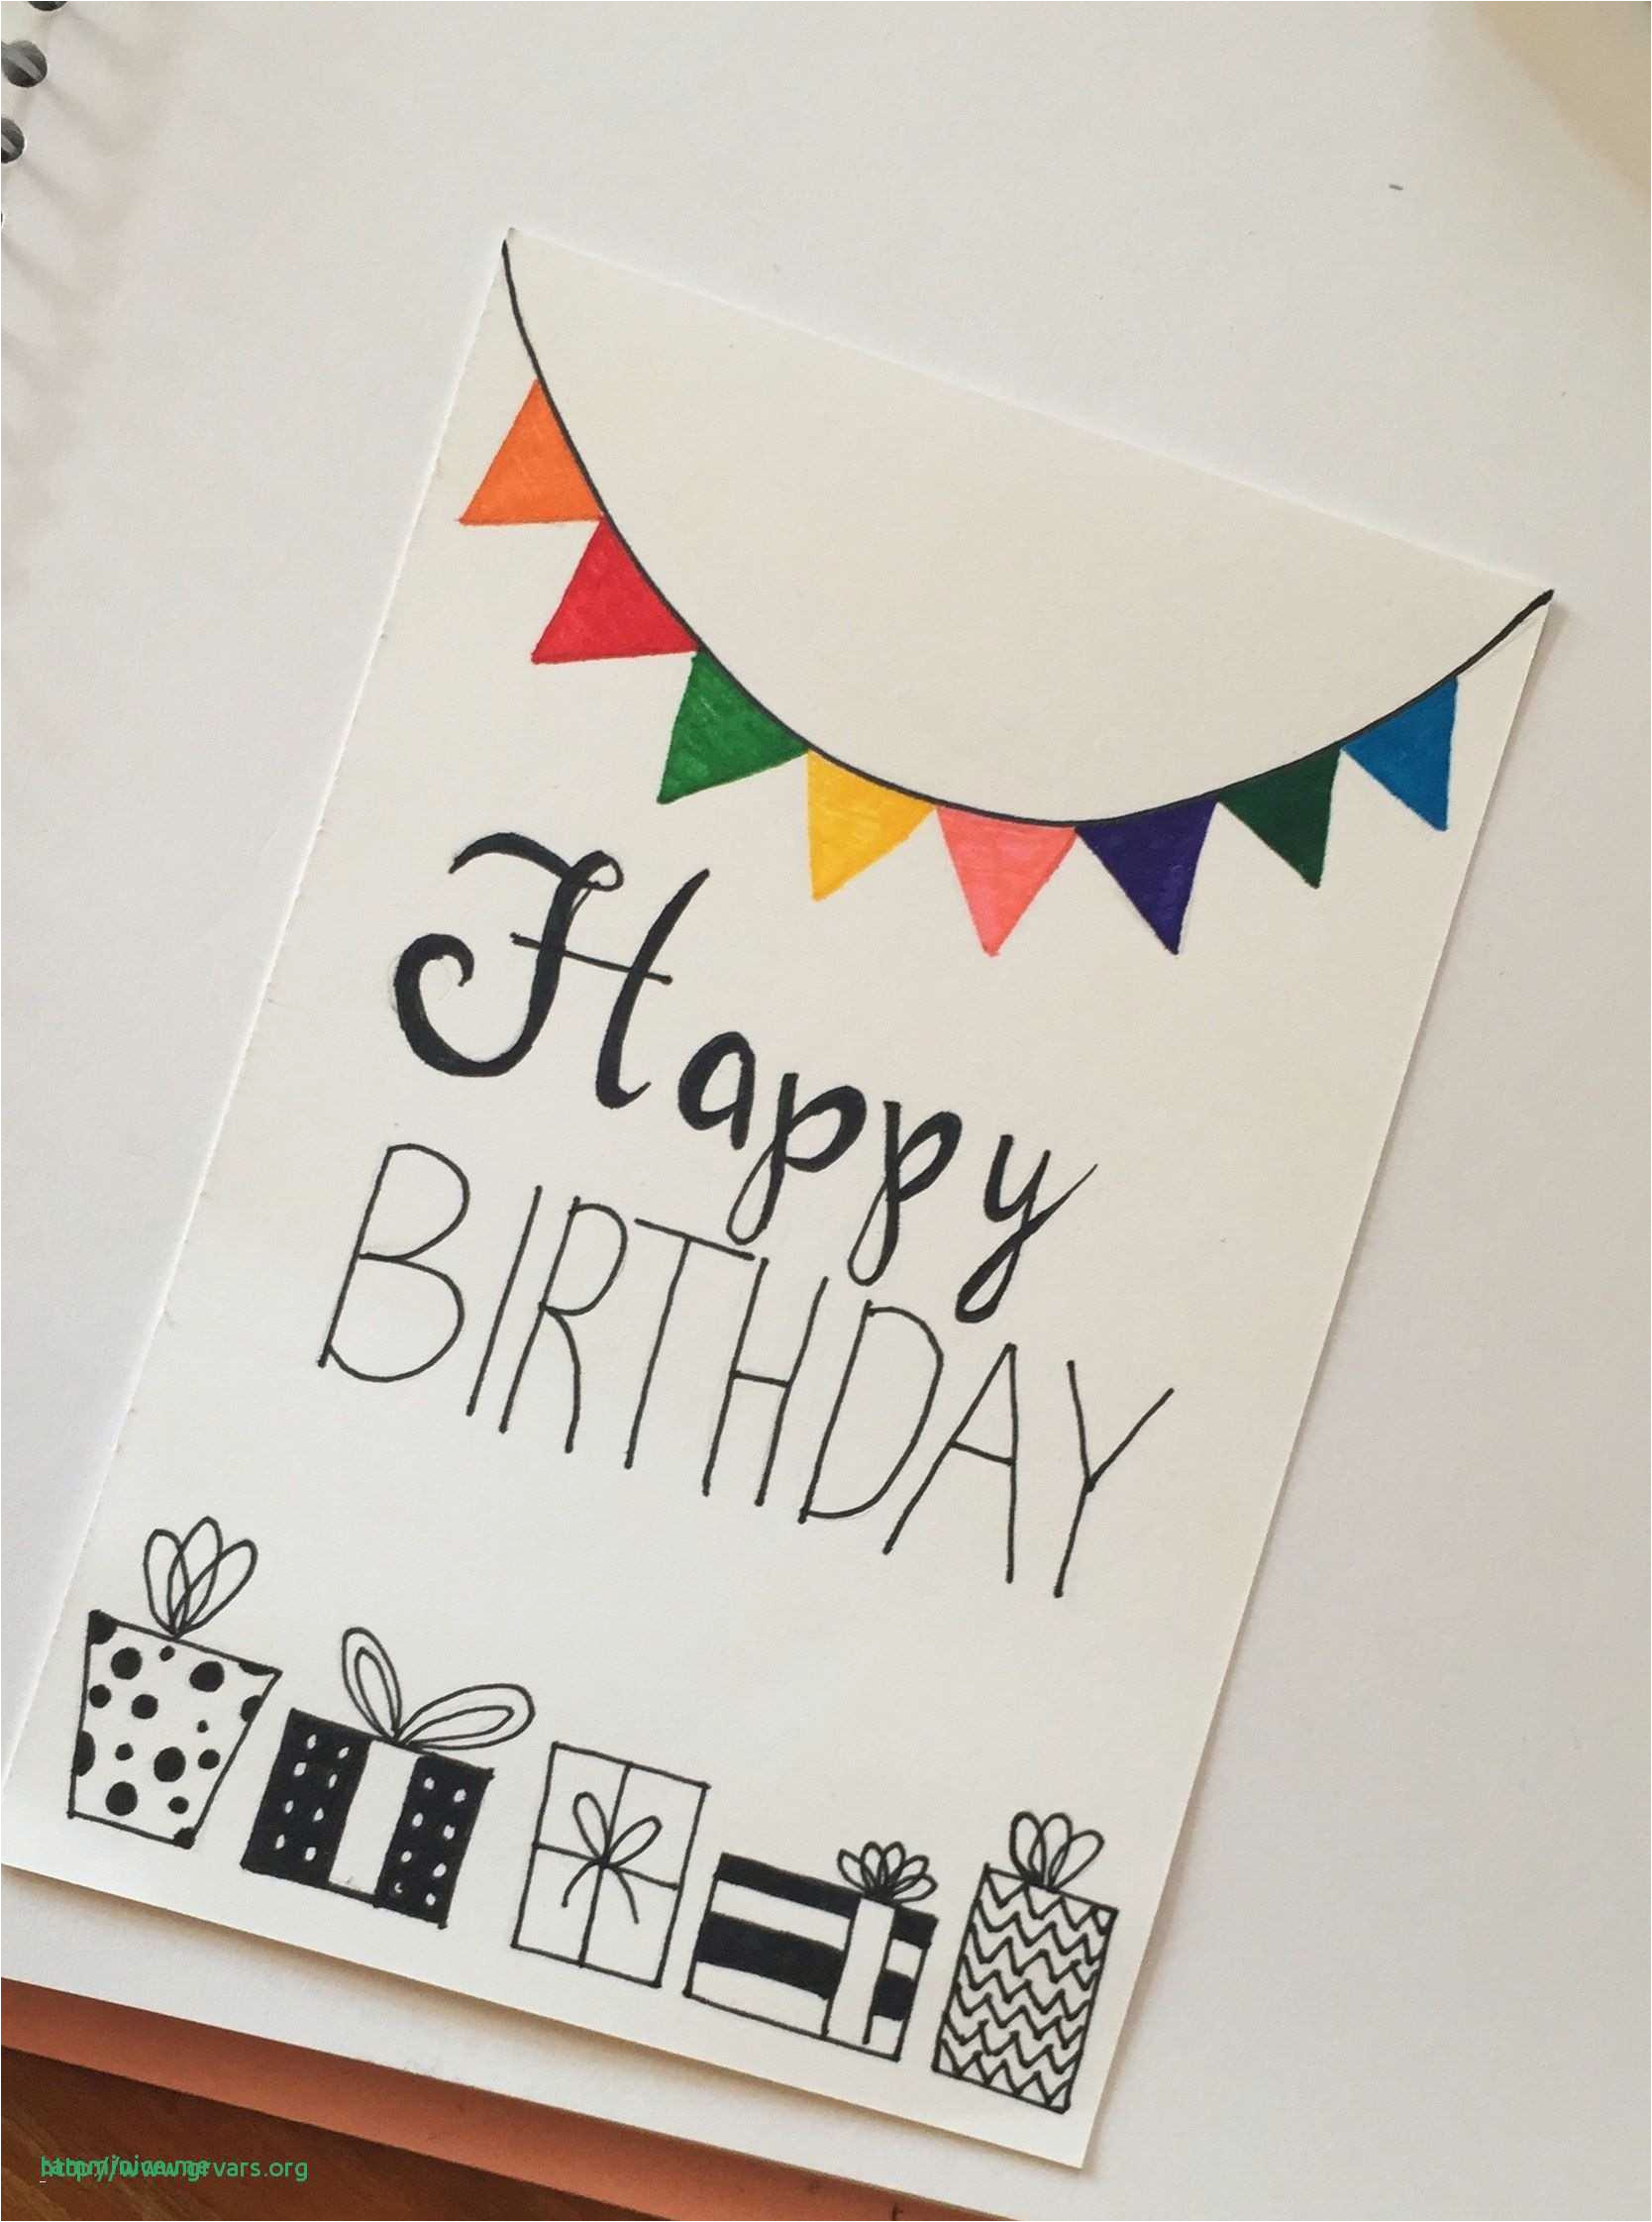 Ideas To Make A Birthday Card How To Make Diy Birthday Cards For Best Friend Simple Handmade